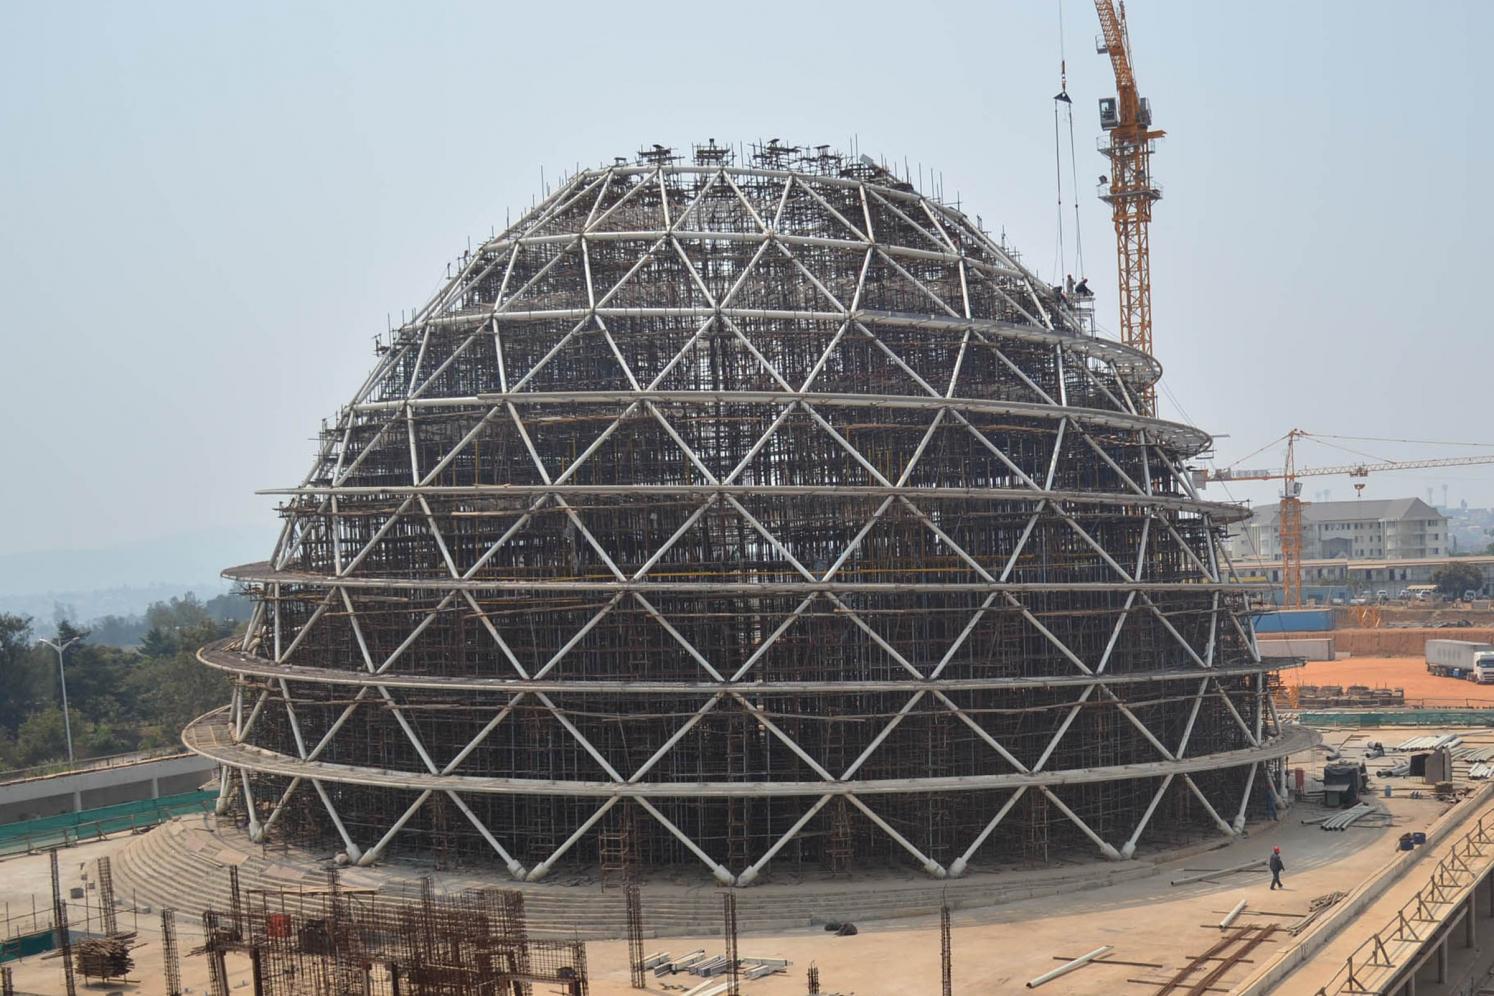 Construction of Dome - side view (livingspaces.net)